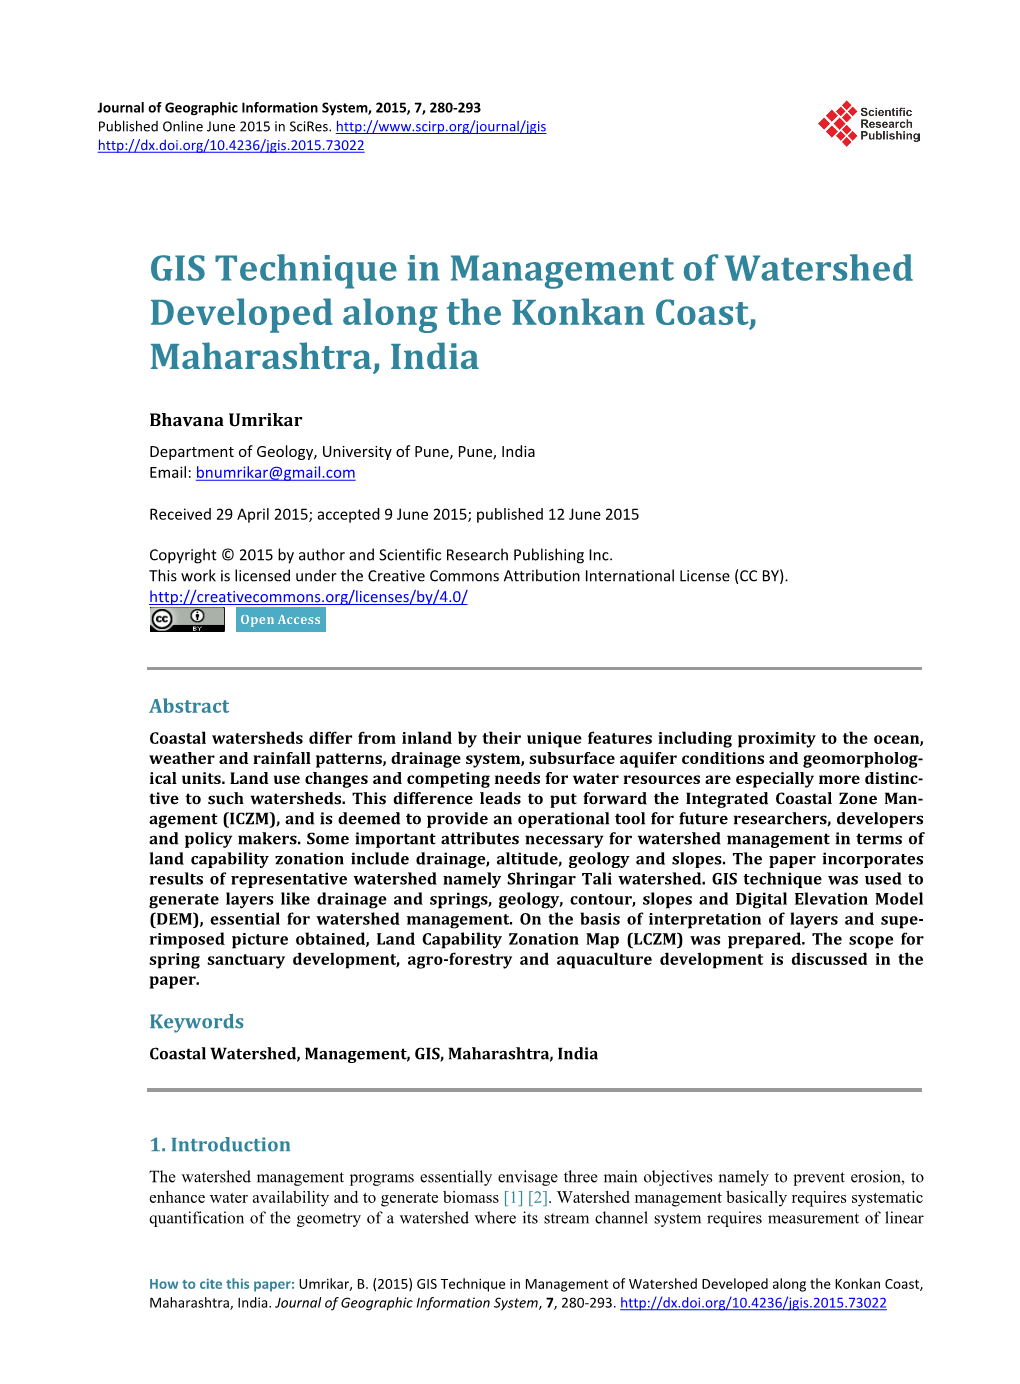 GIS Technique in Management of Watershed Developed Along the Konkan Coast, Maharashtra, India